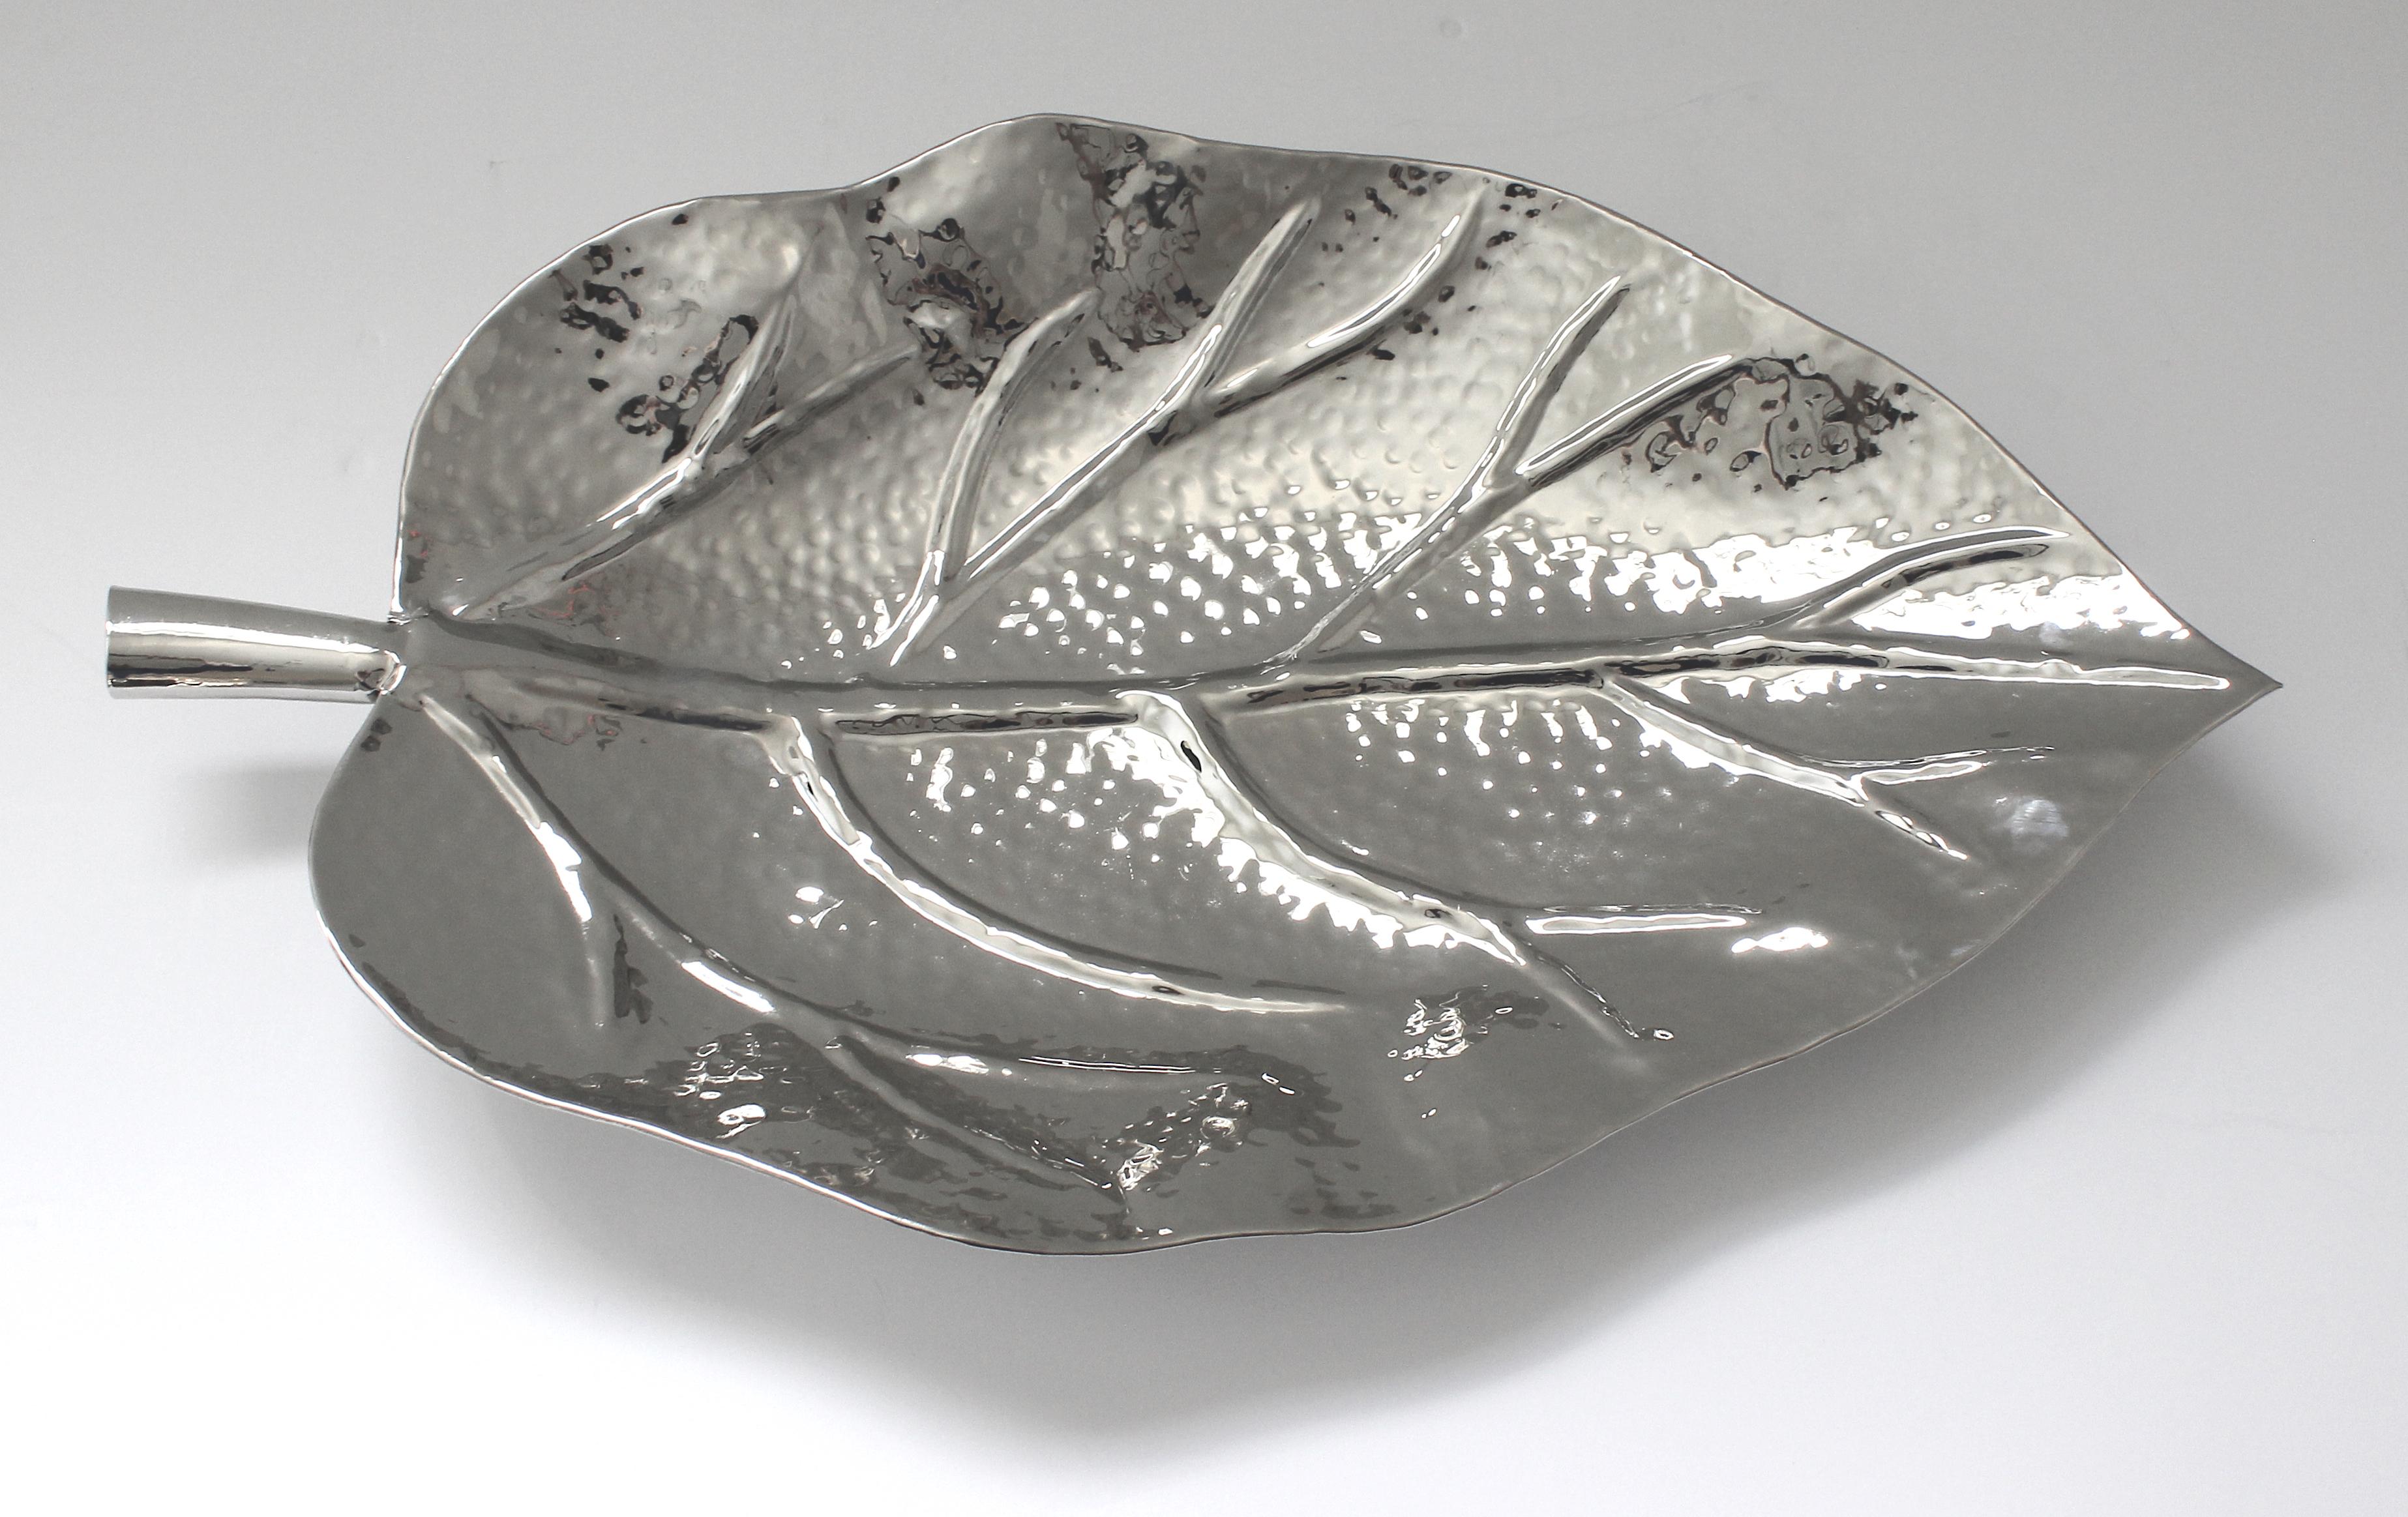 Cast Nickel Plated Leaf Form Serving Tray by Iconic Snob Galeries For Sale